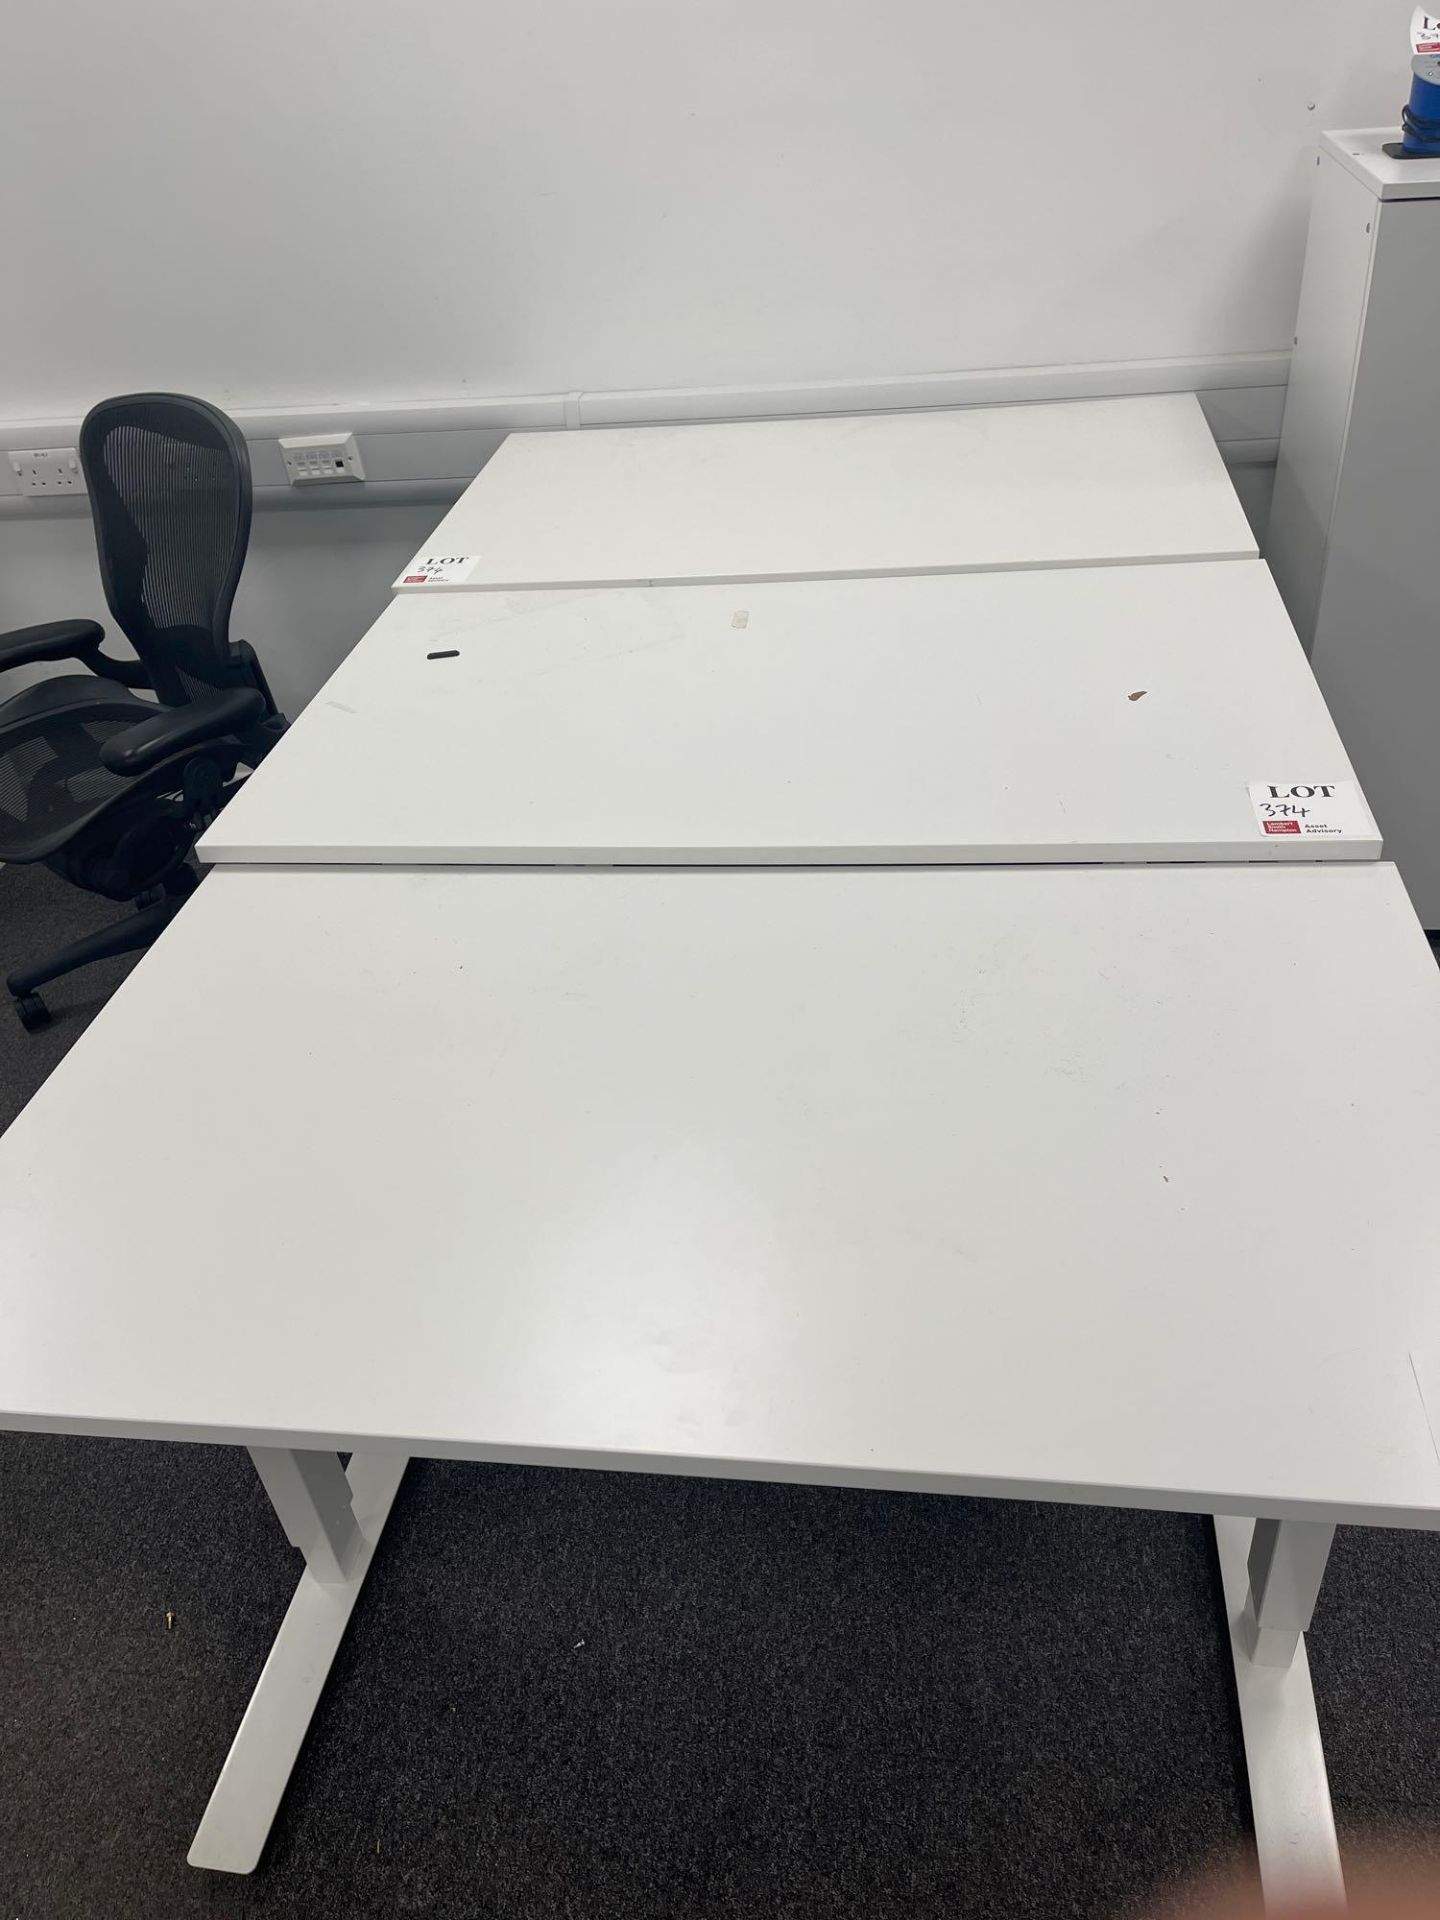 Three white adjustable height desks (excludes contents) (approximately 120cm L x 70cm W) - Image 2 of 3